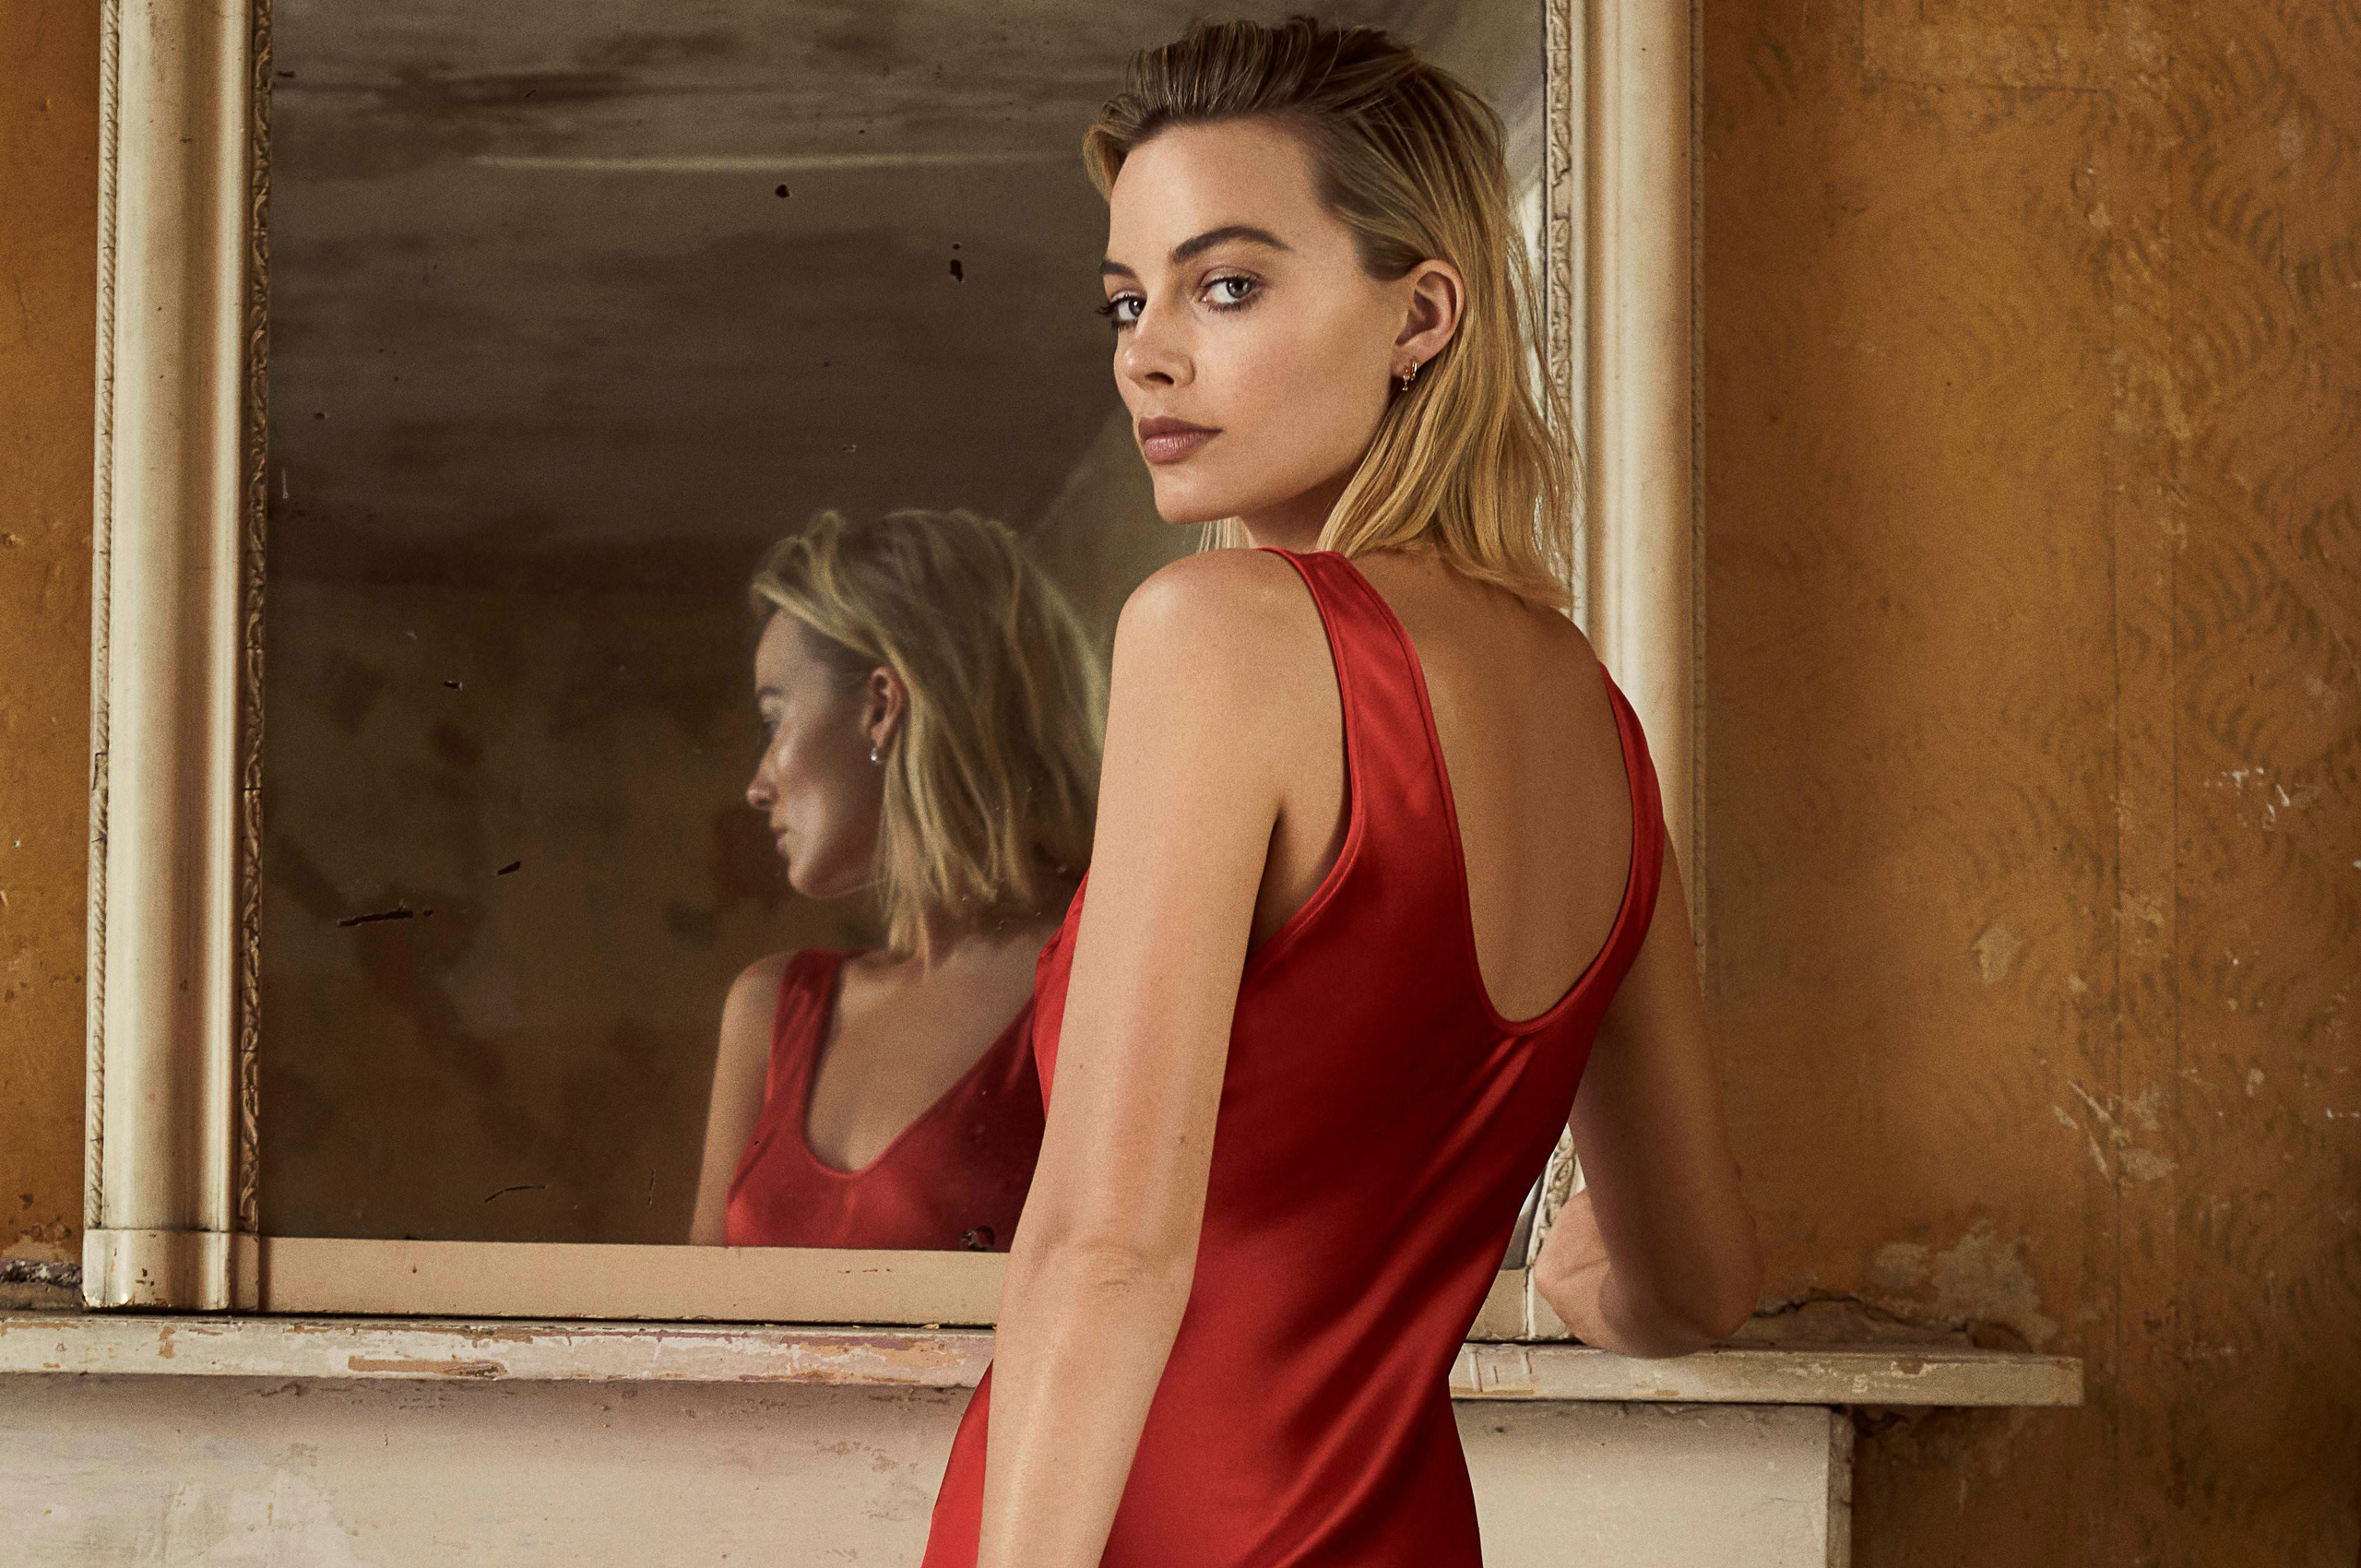 margot-robbie-in-red-dress-photoshoot-for-evening-standarad-7a.jpg. 